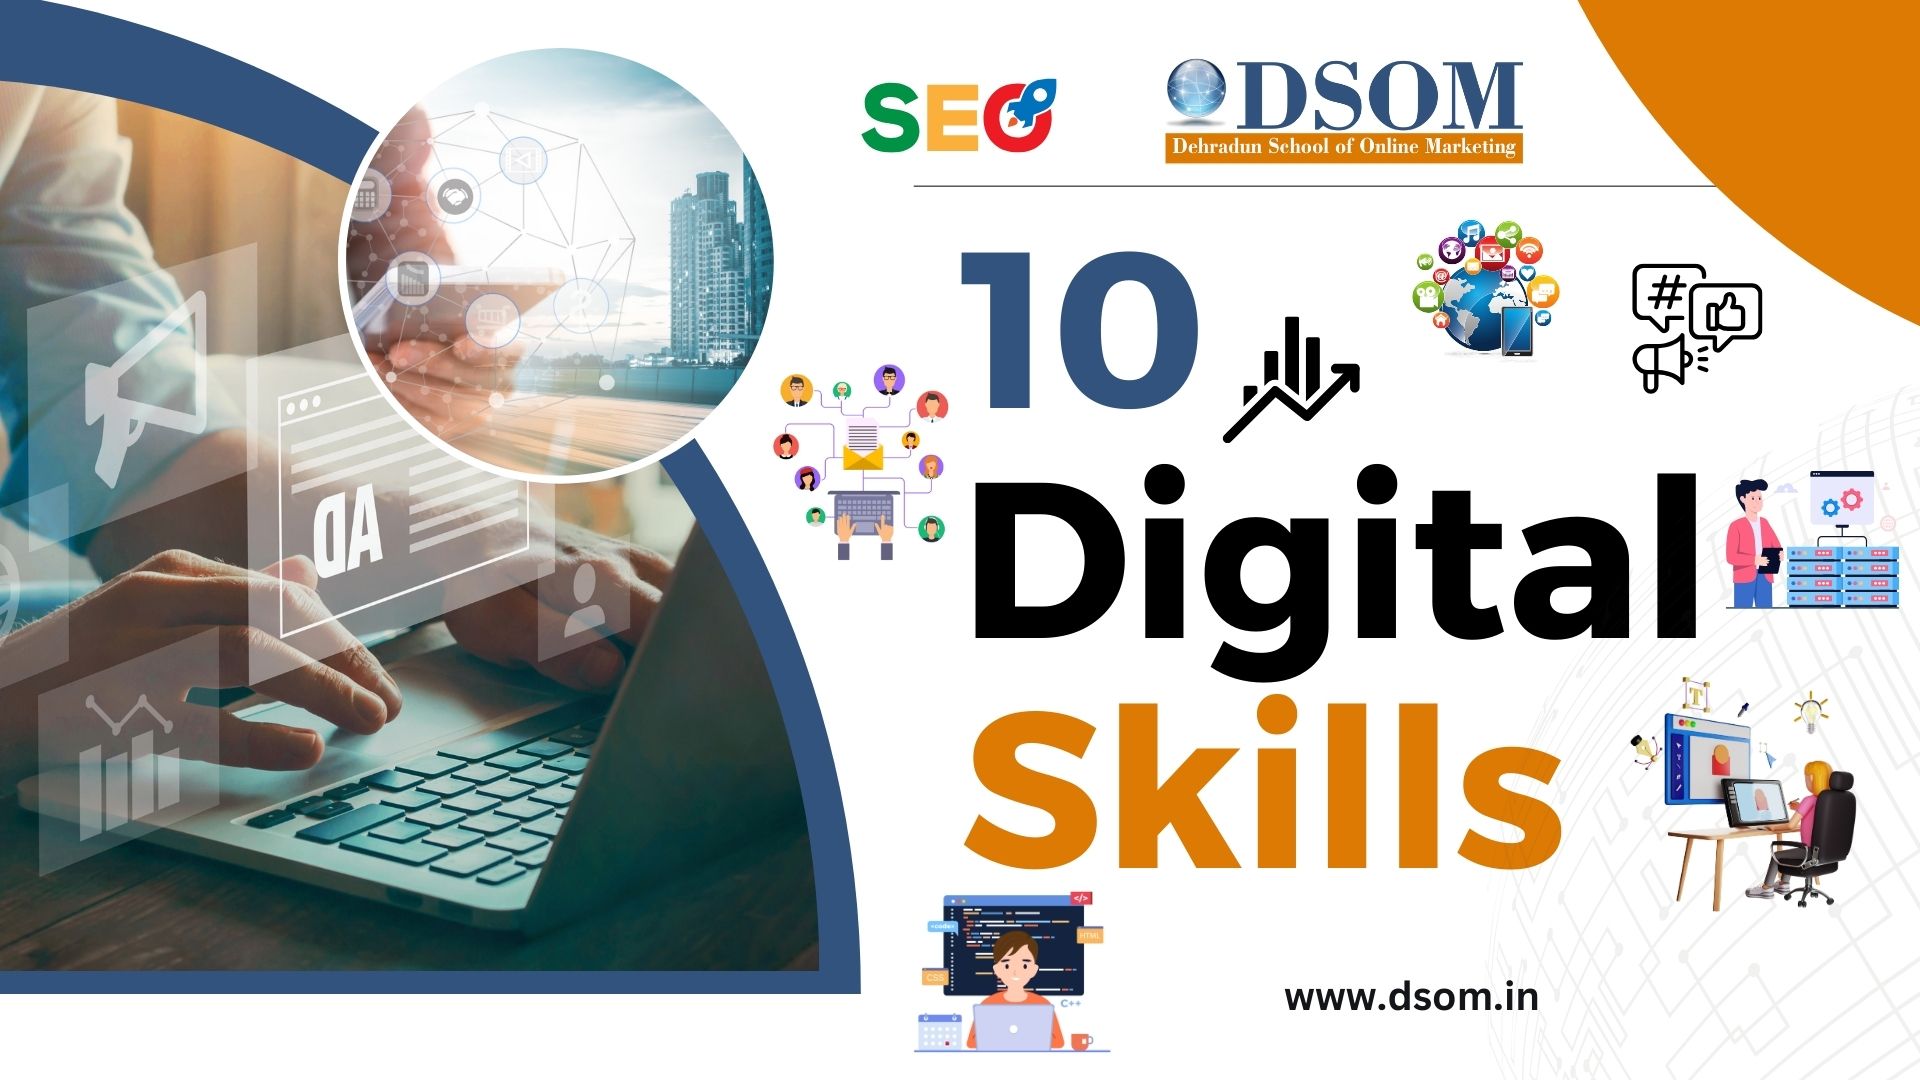 10 Digital Skills That Can Make Students Instantly Employable